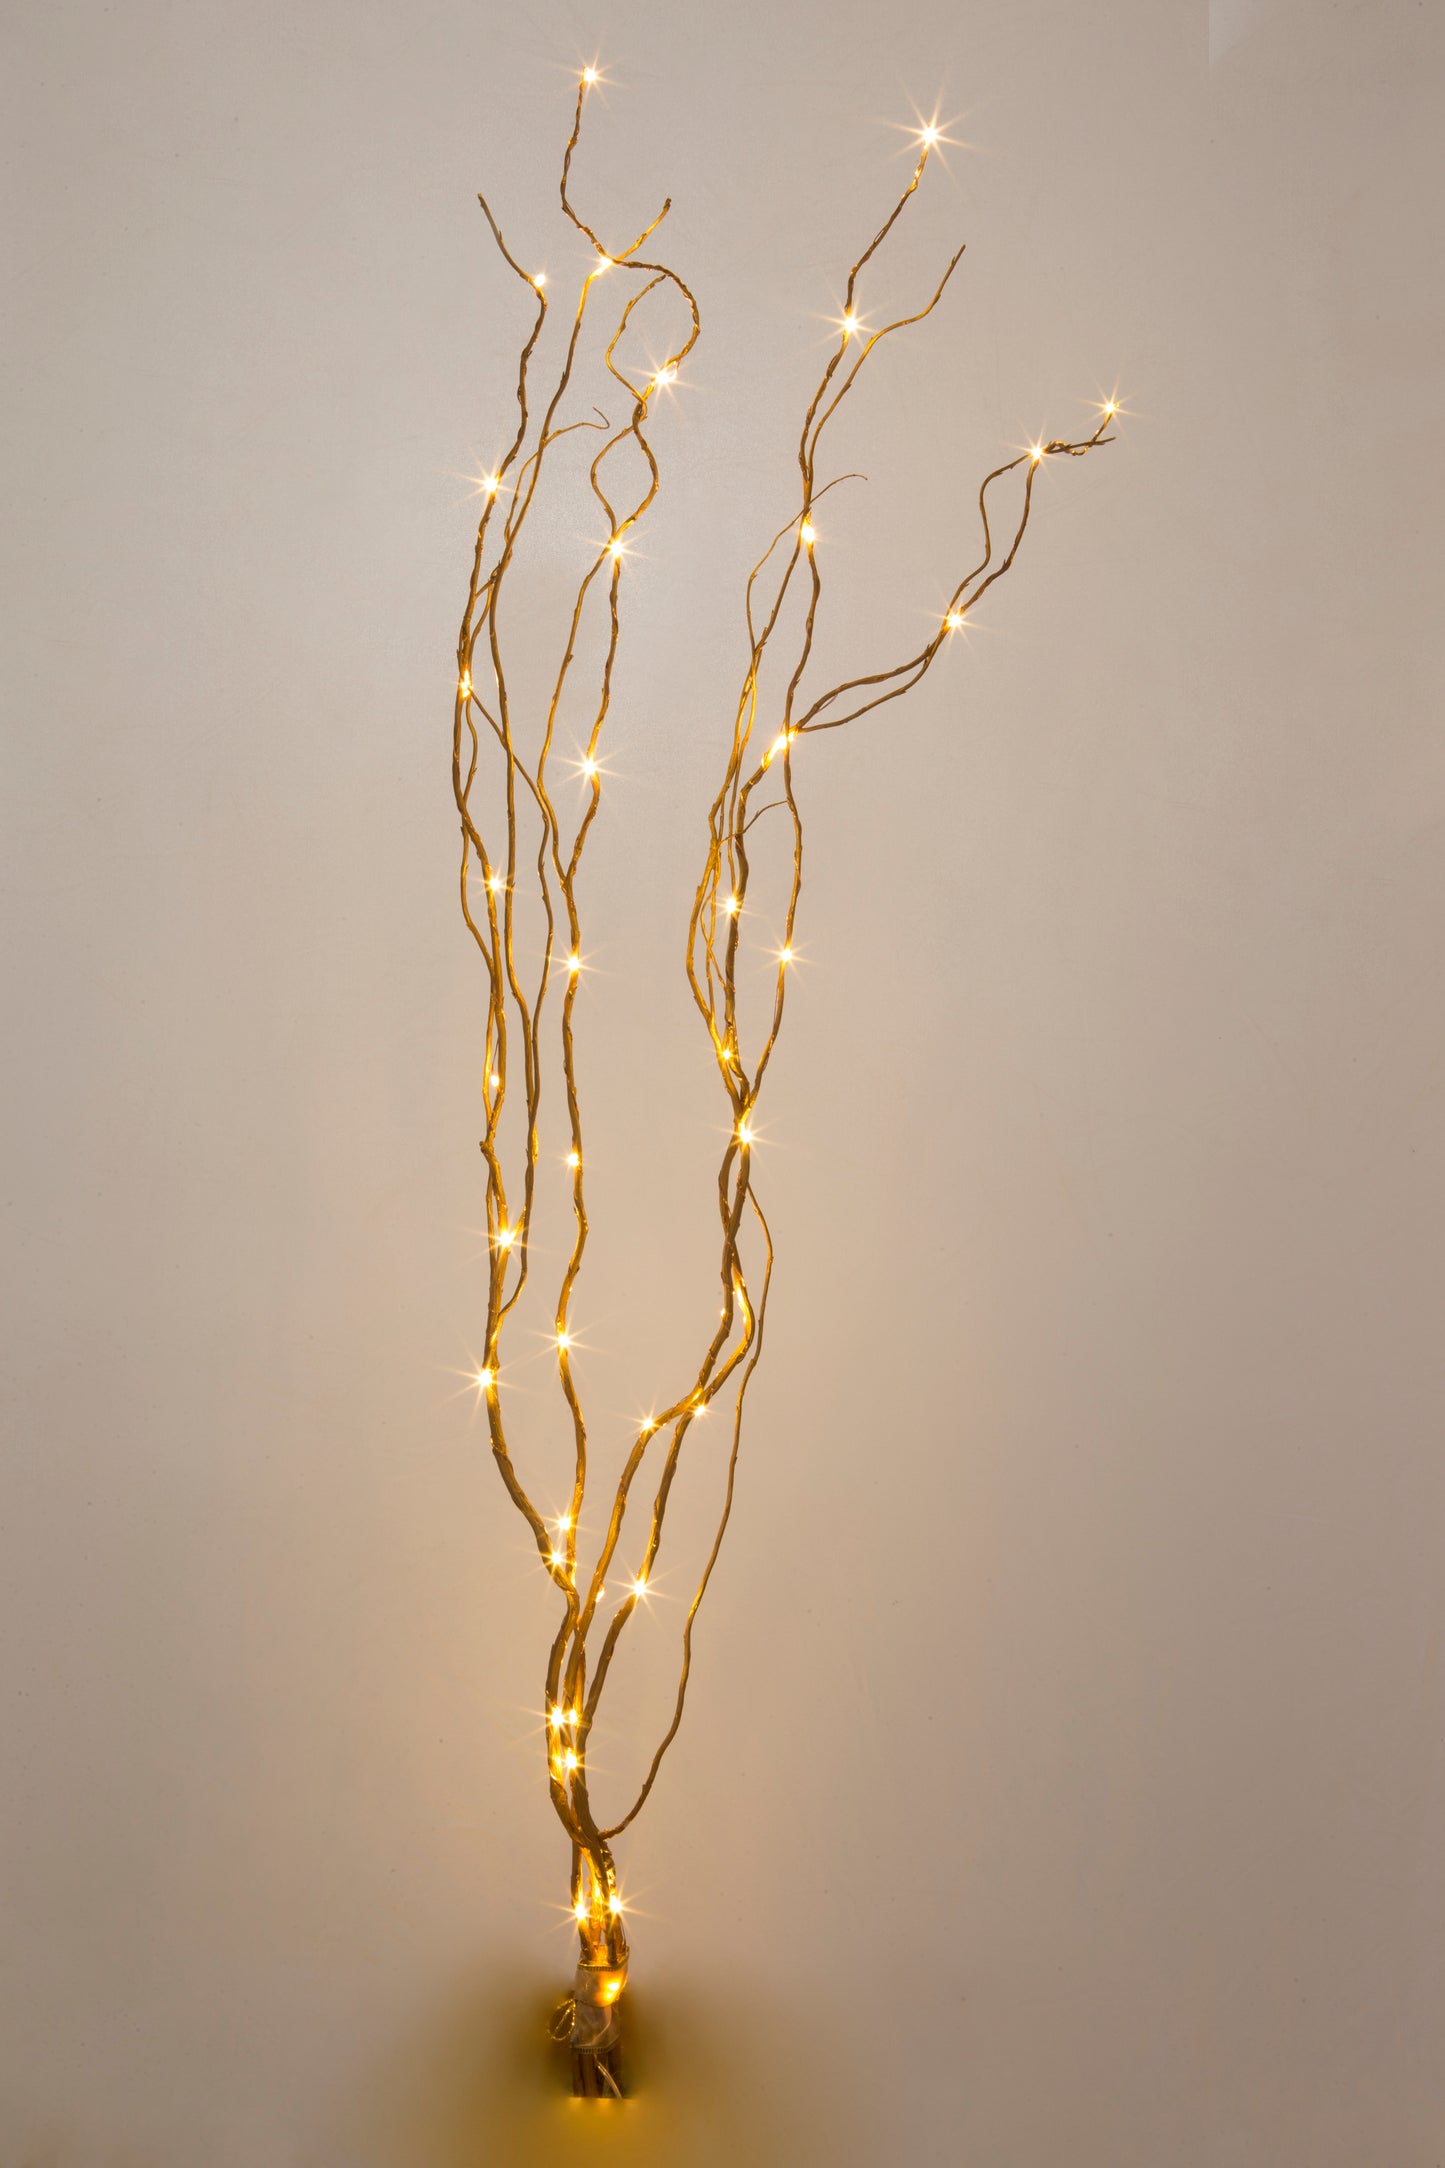 48" LED Lighted Gold Curly Willow Branches with 8 Function Remote